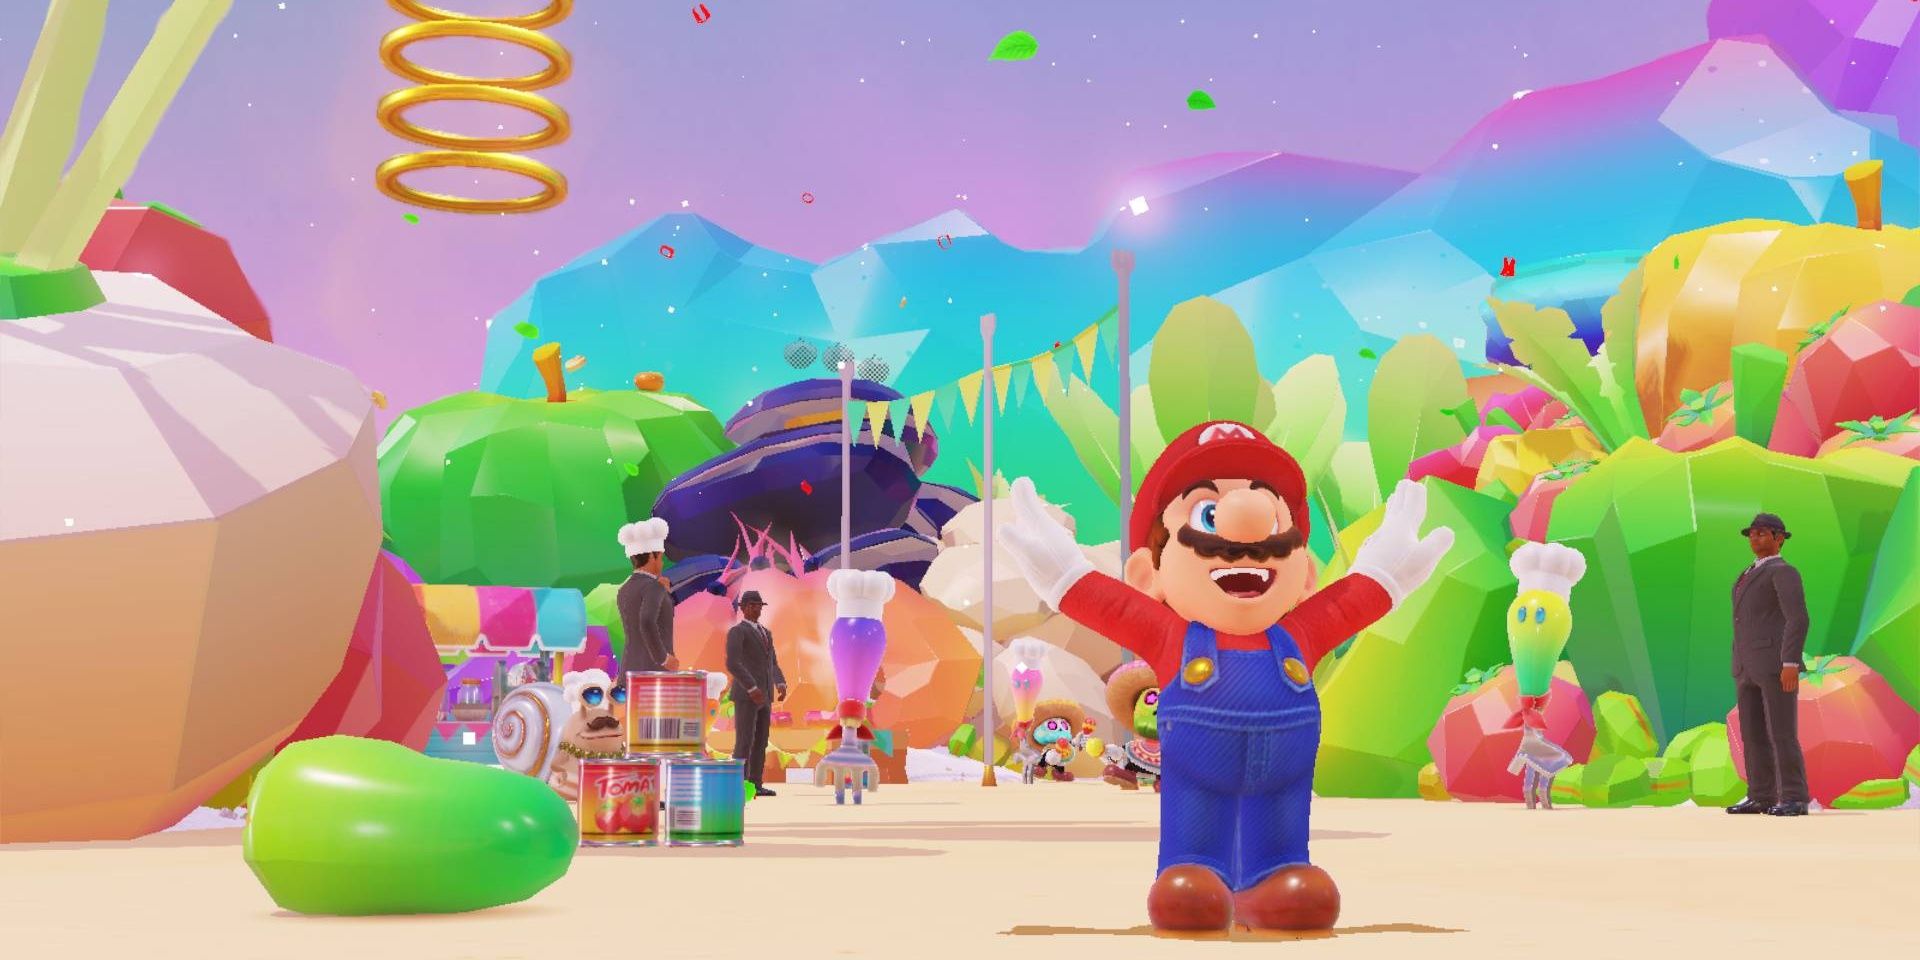 Mario Odyssey Multiplayer in 2022 is Crazy 